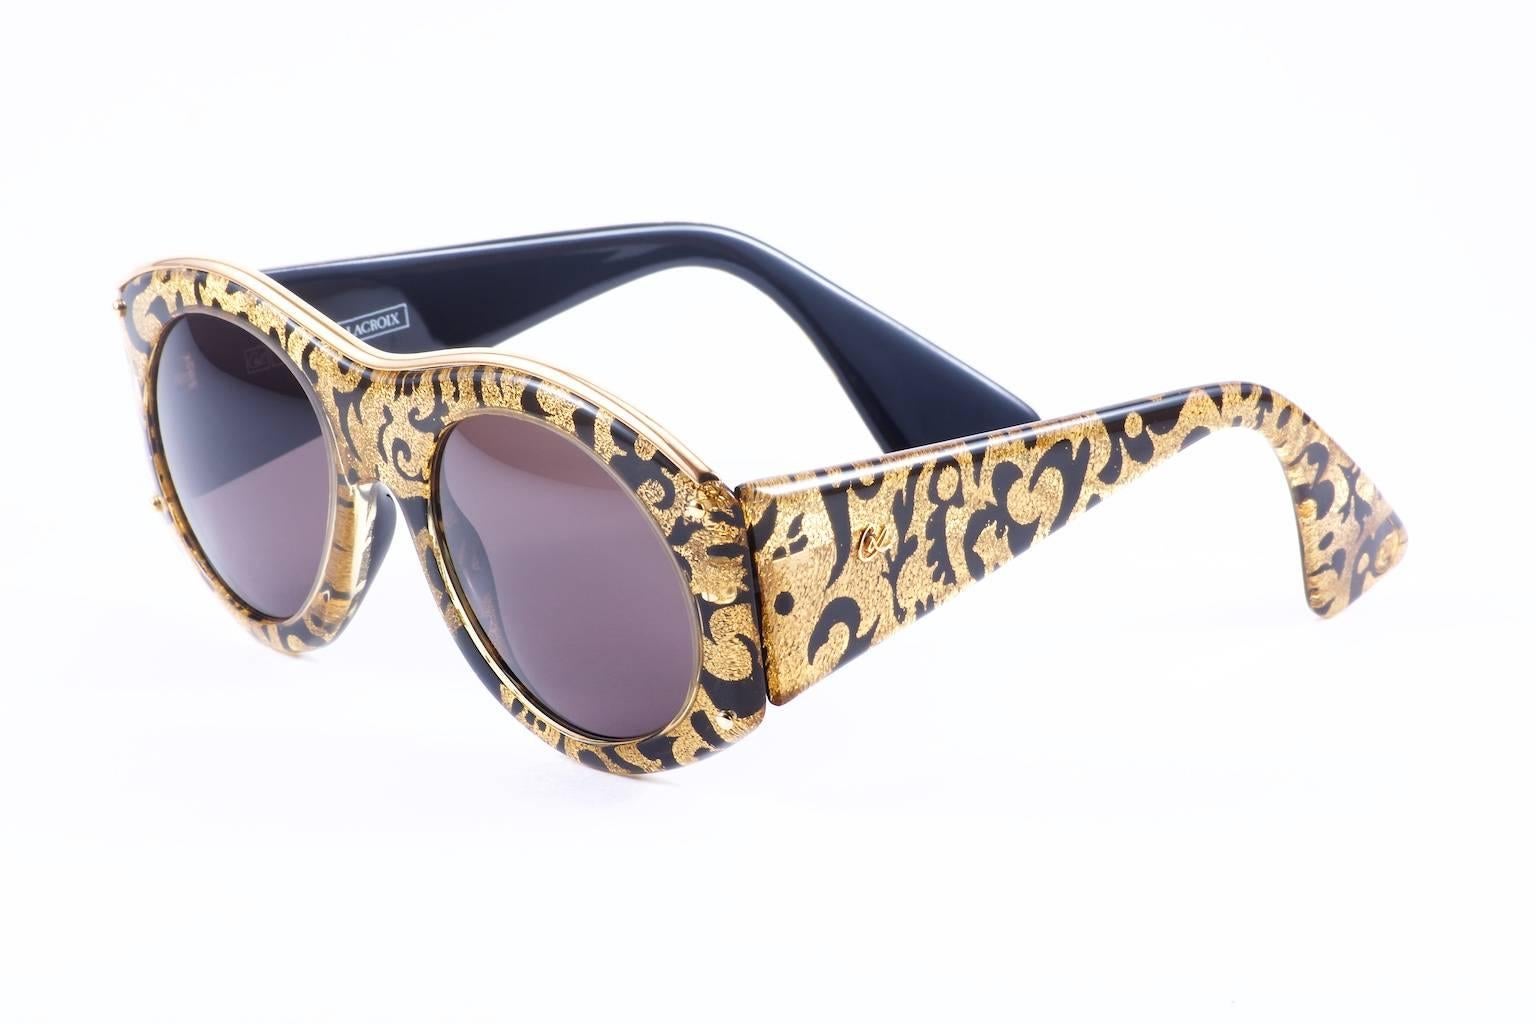 Gorgeous Sunglasses perfect for the sophisticated woman.
Gold rococo patten layered with solid gold and black interior.
Swooping gold metal accent adds a touch of elegance to this
fabulous 80's accessory.
Put on your favorite 